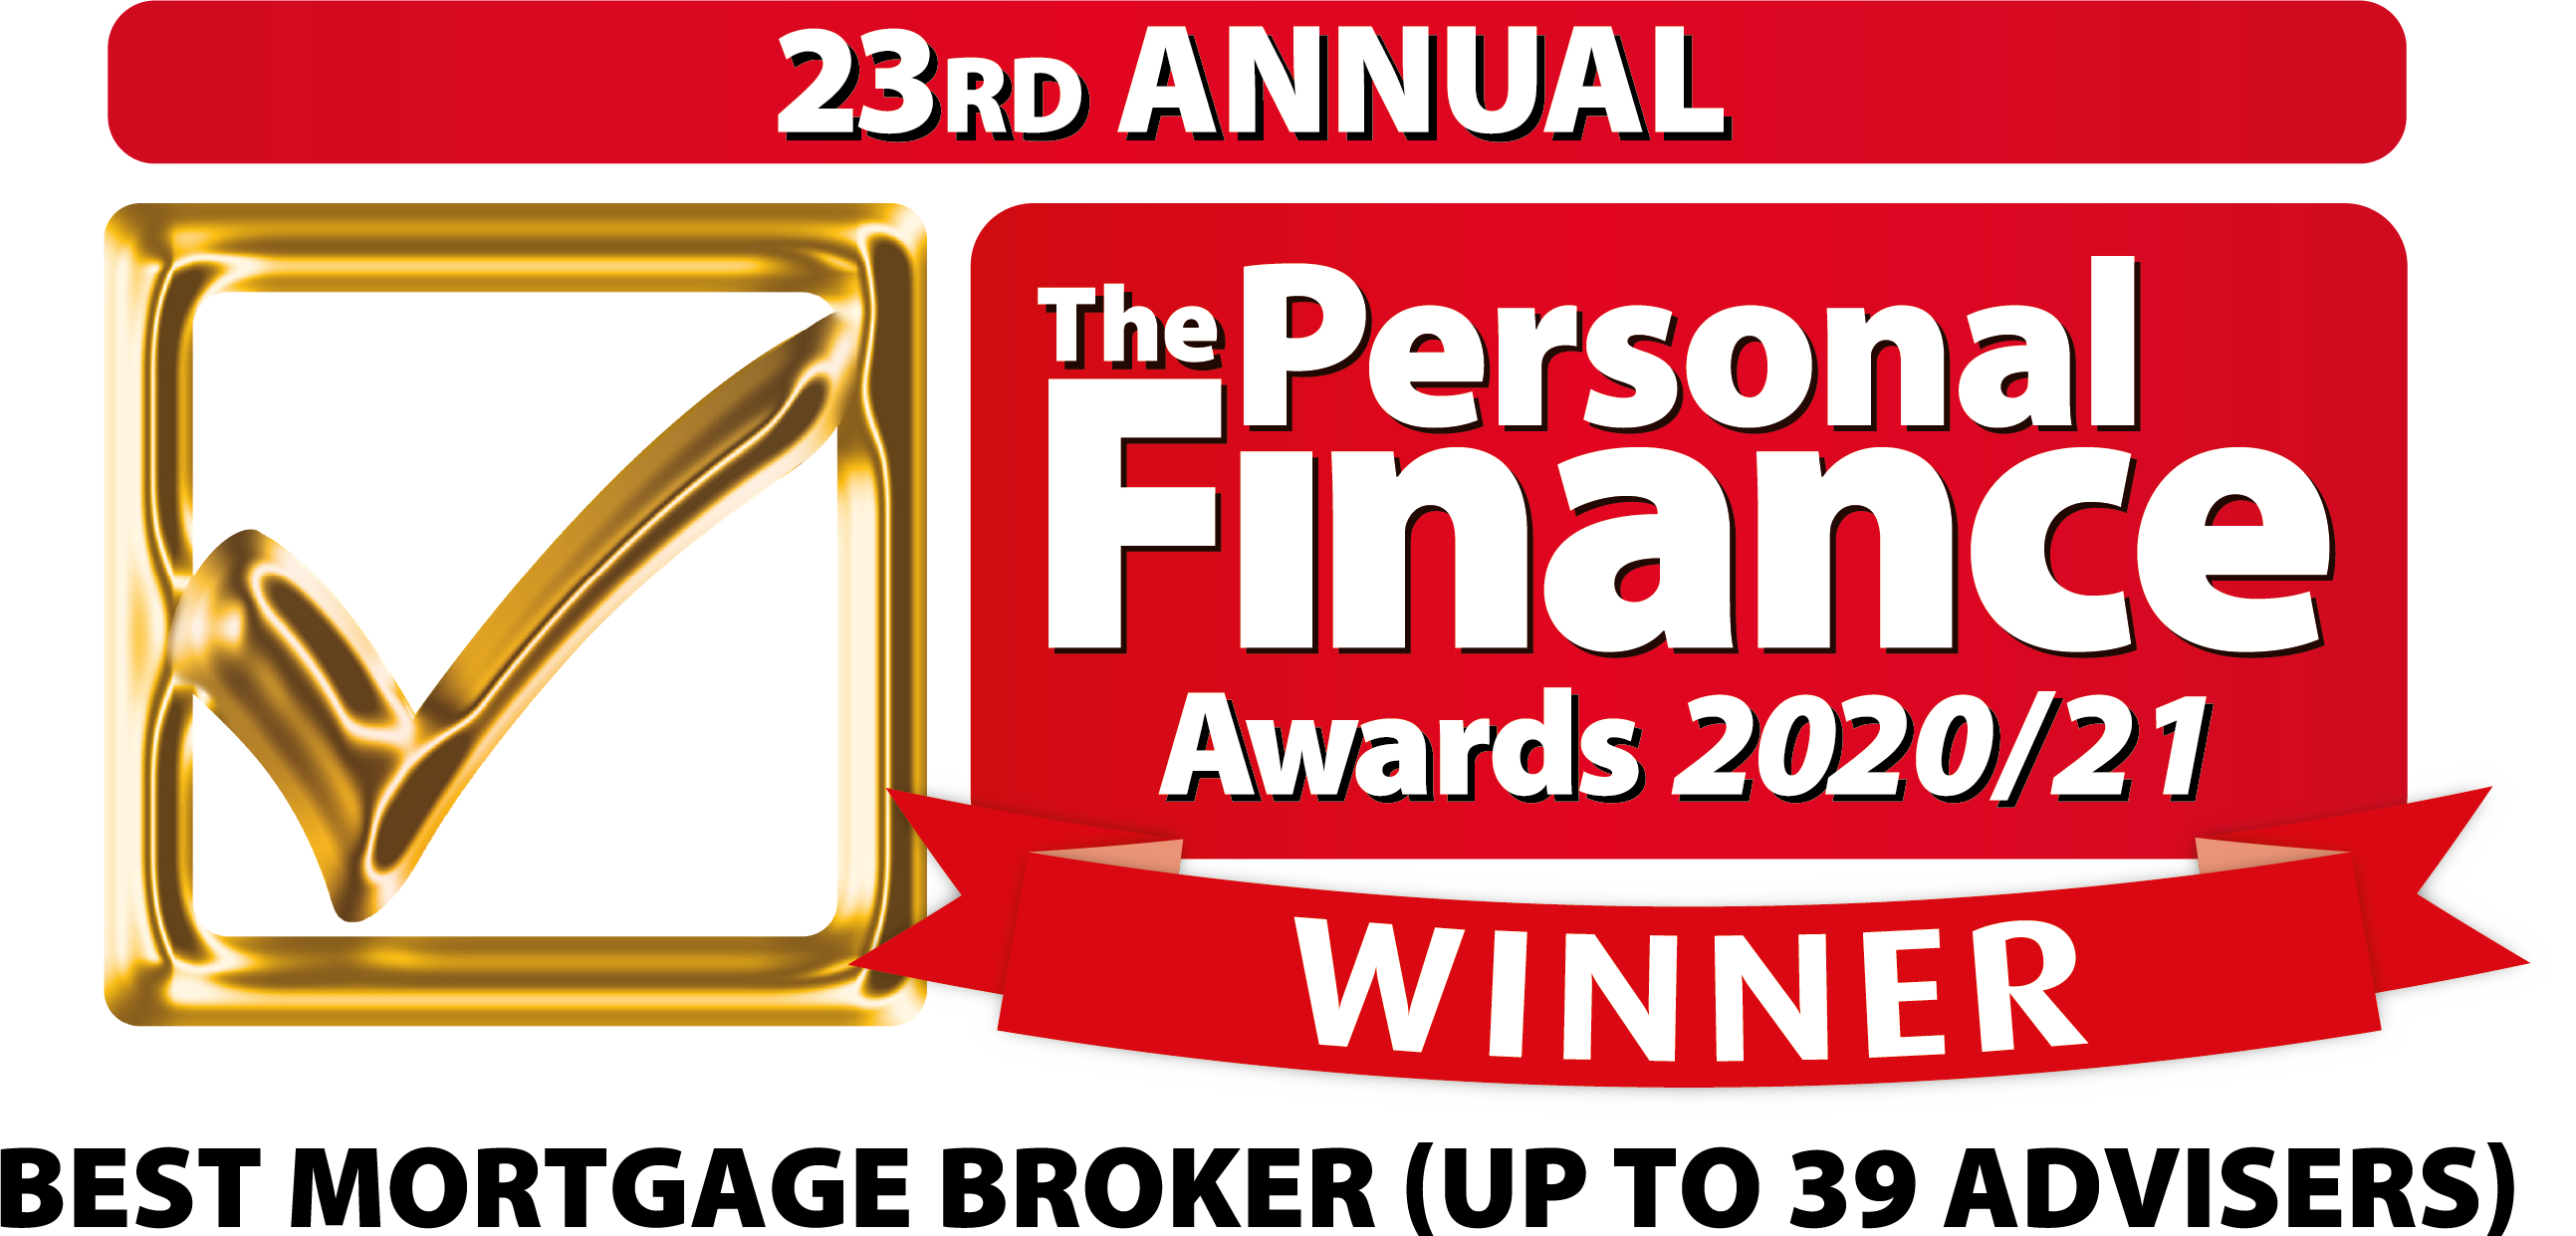 The Personal Finance Awards 2020/2021